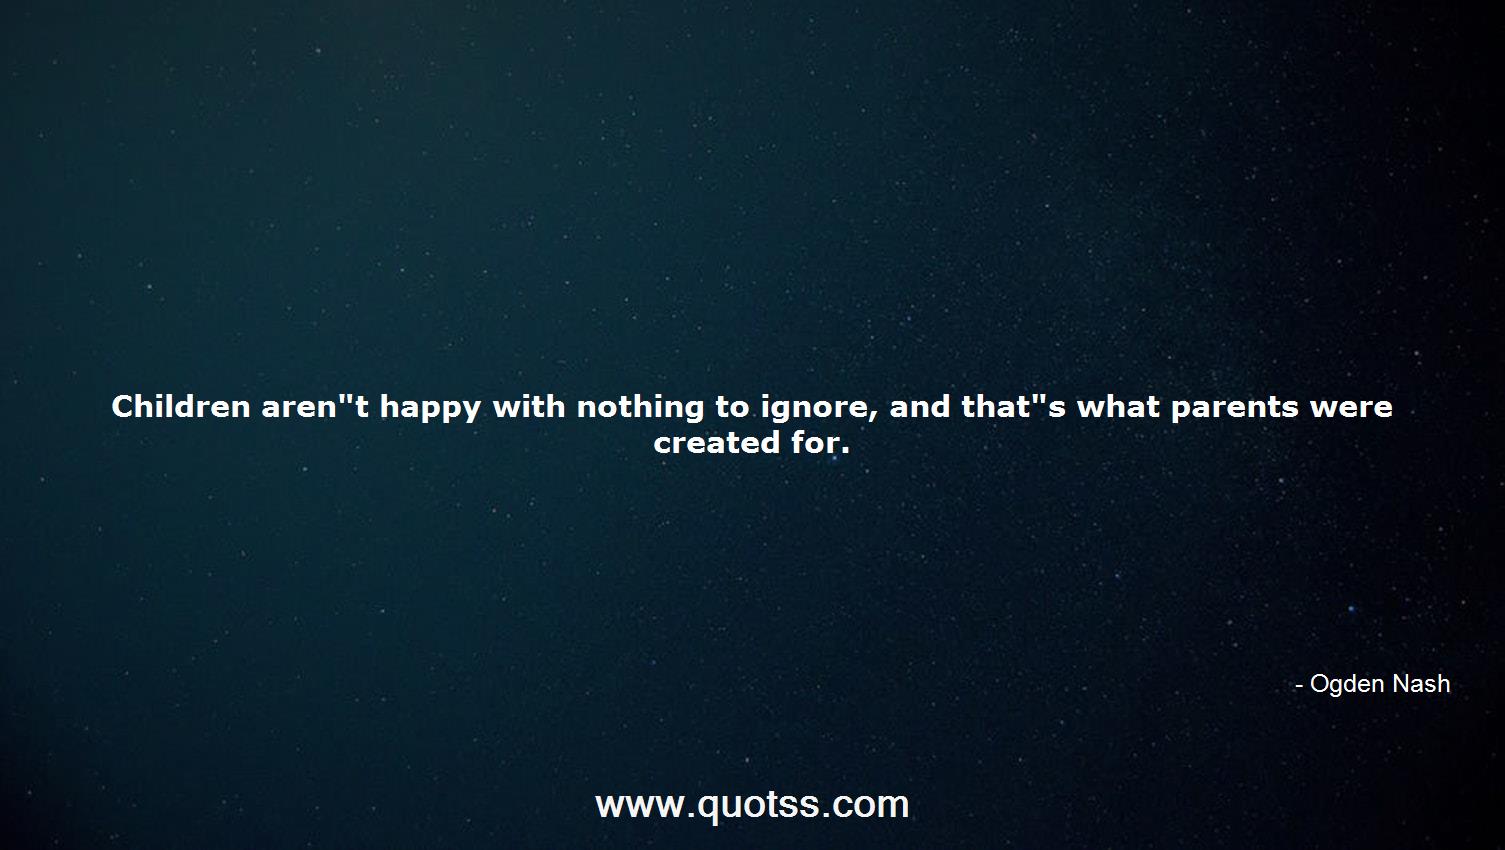 Ogden Nash Quote on Quotss